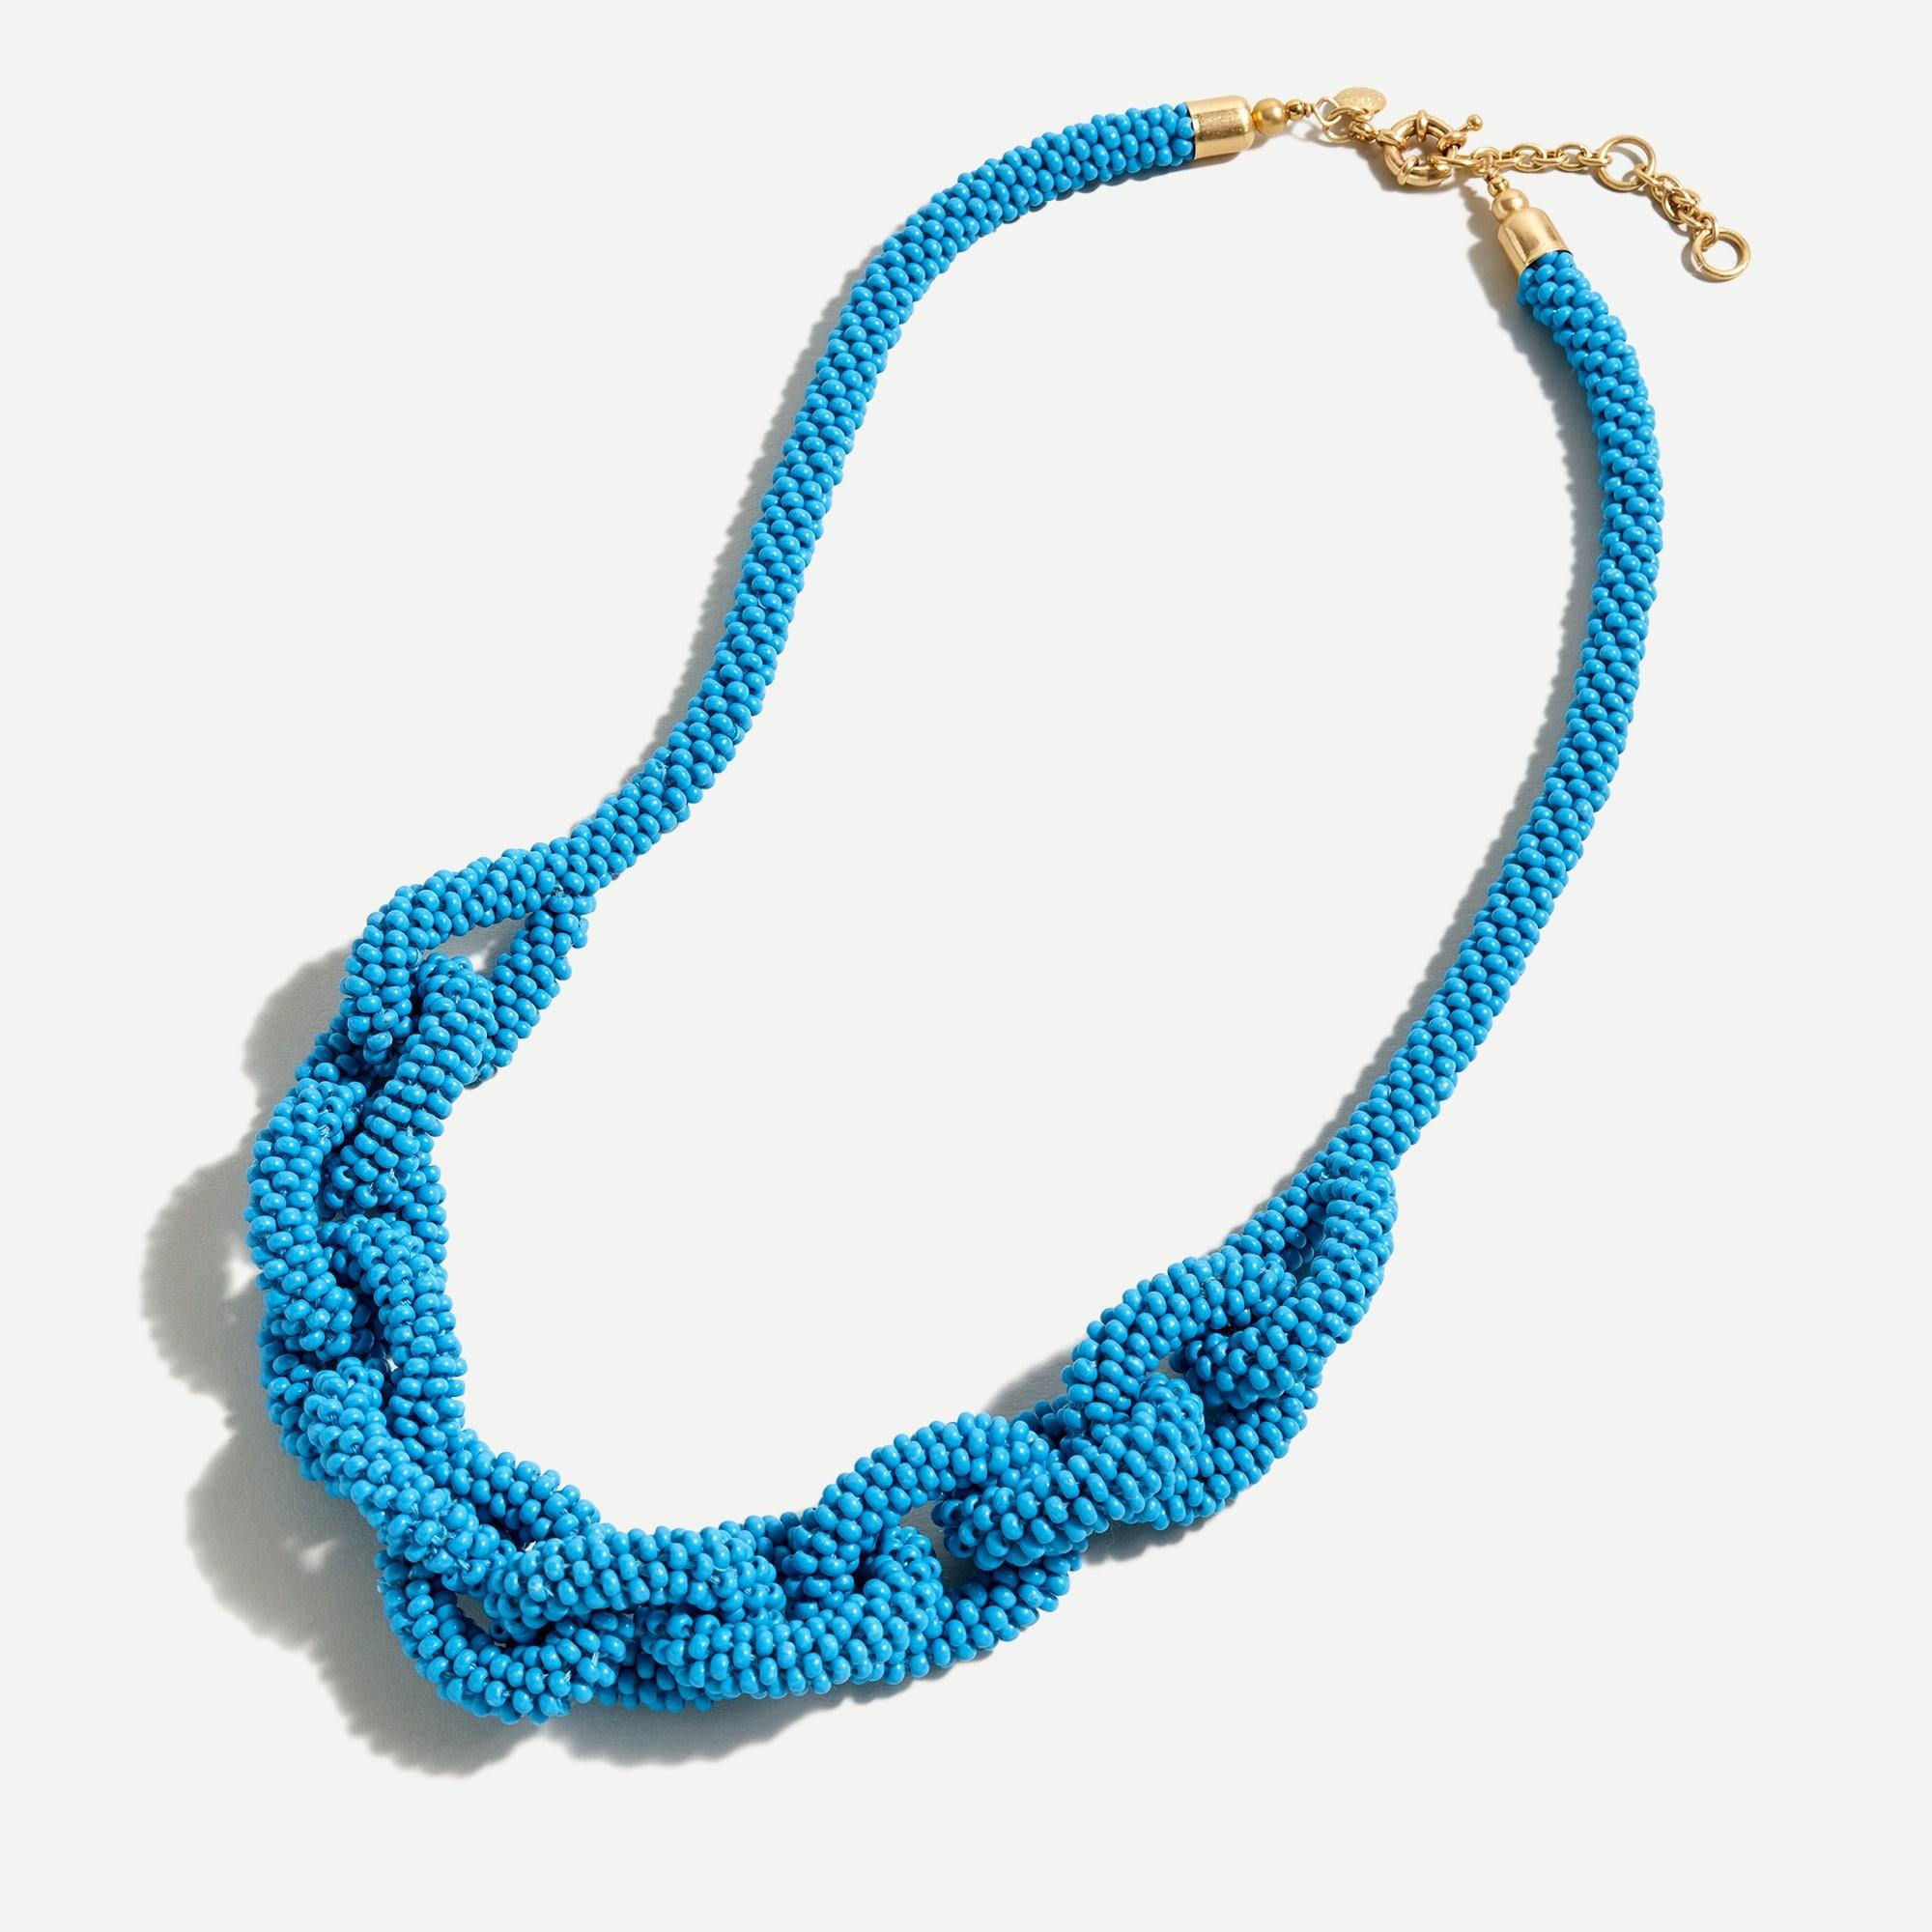 Blue beaded chain necklace!